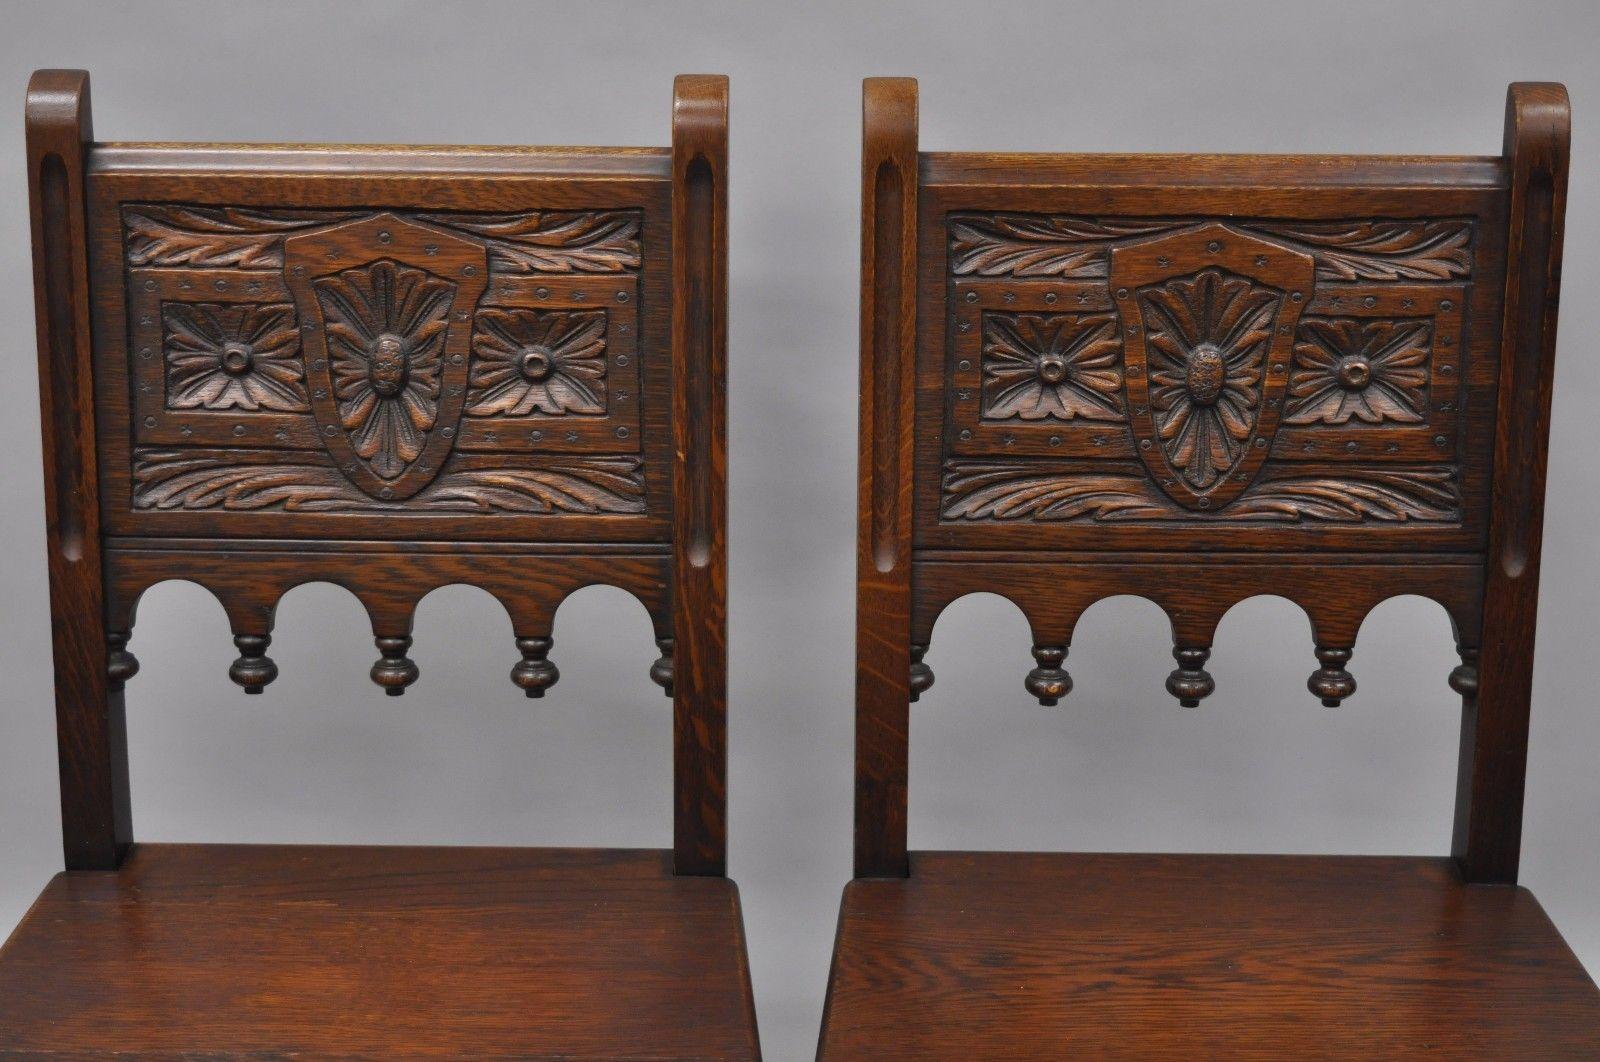 Set of six Antique oak wood gothic/renaissance revival dining side chairs. Item features solid wood construction, beautiful wood-grain, nicely carved details, stretcher bases, floral & leaf carved backs. Circa Early 1900s. Measurements: 35